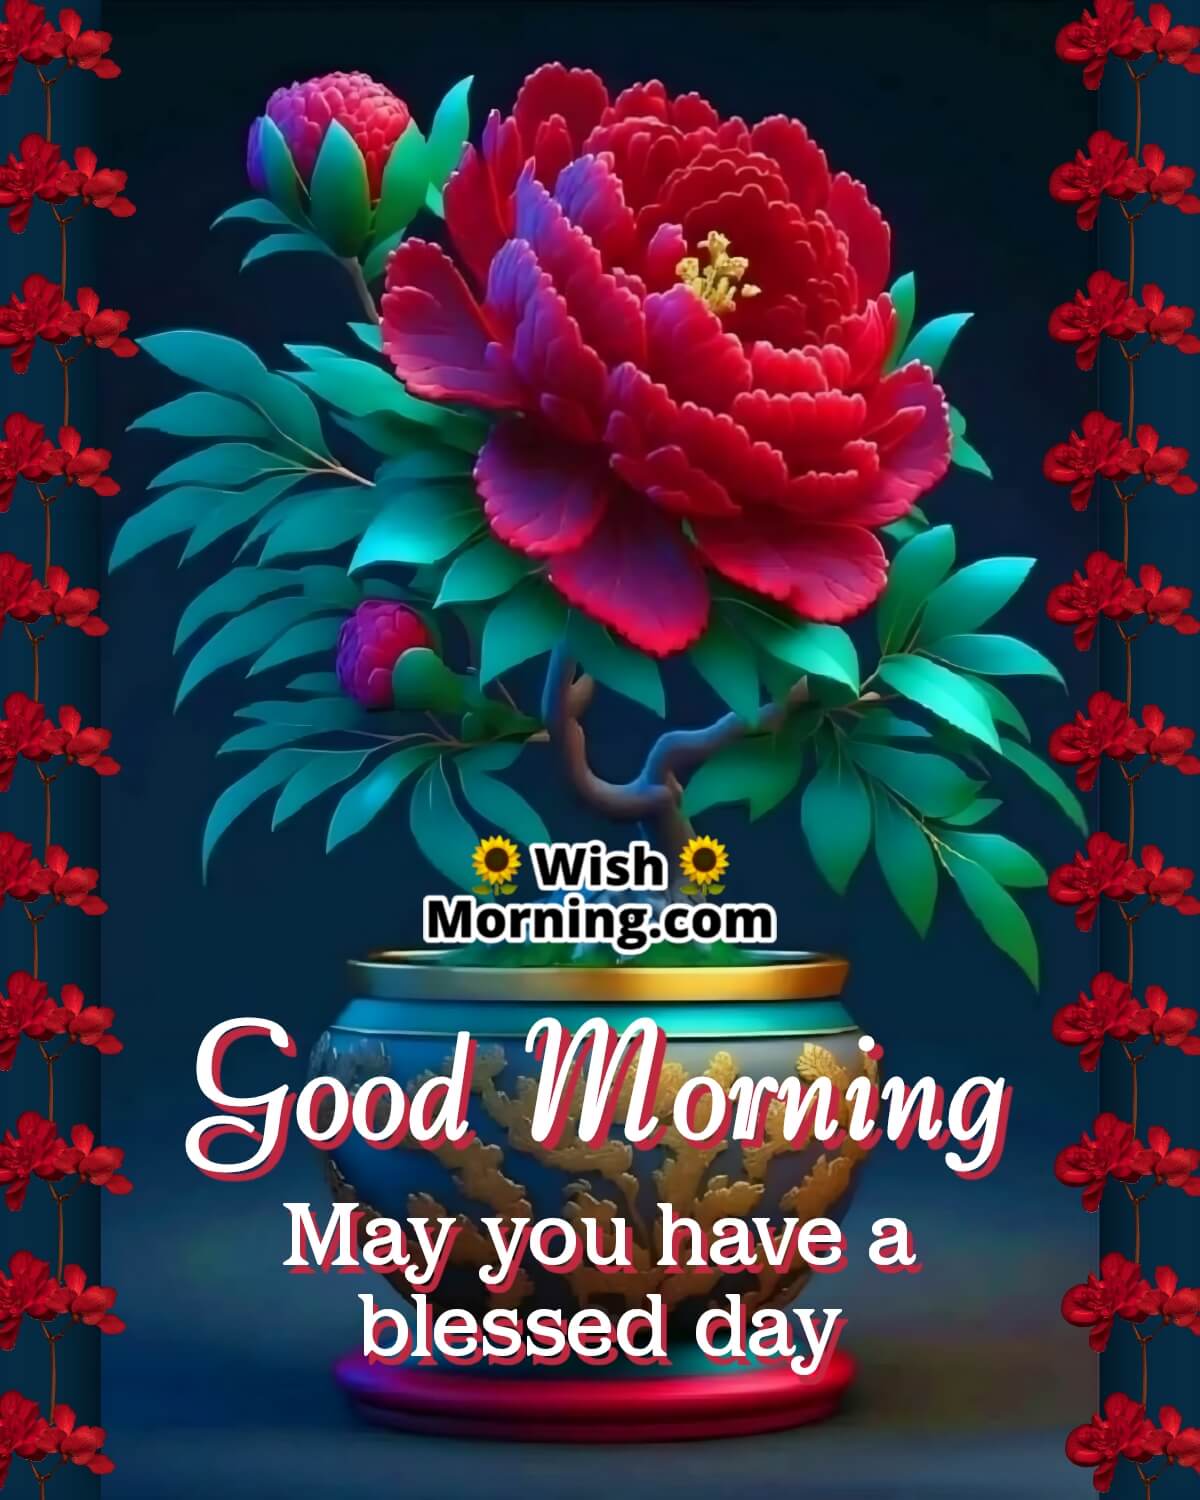 Good Morning Flower Bouquet Images - Wish Morning